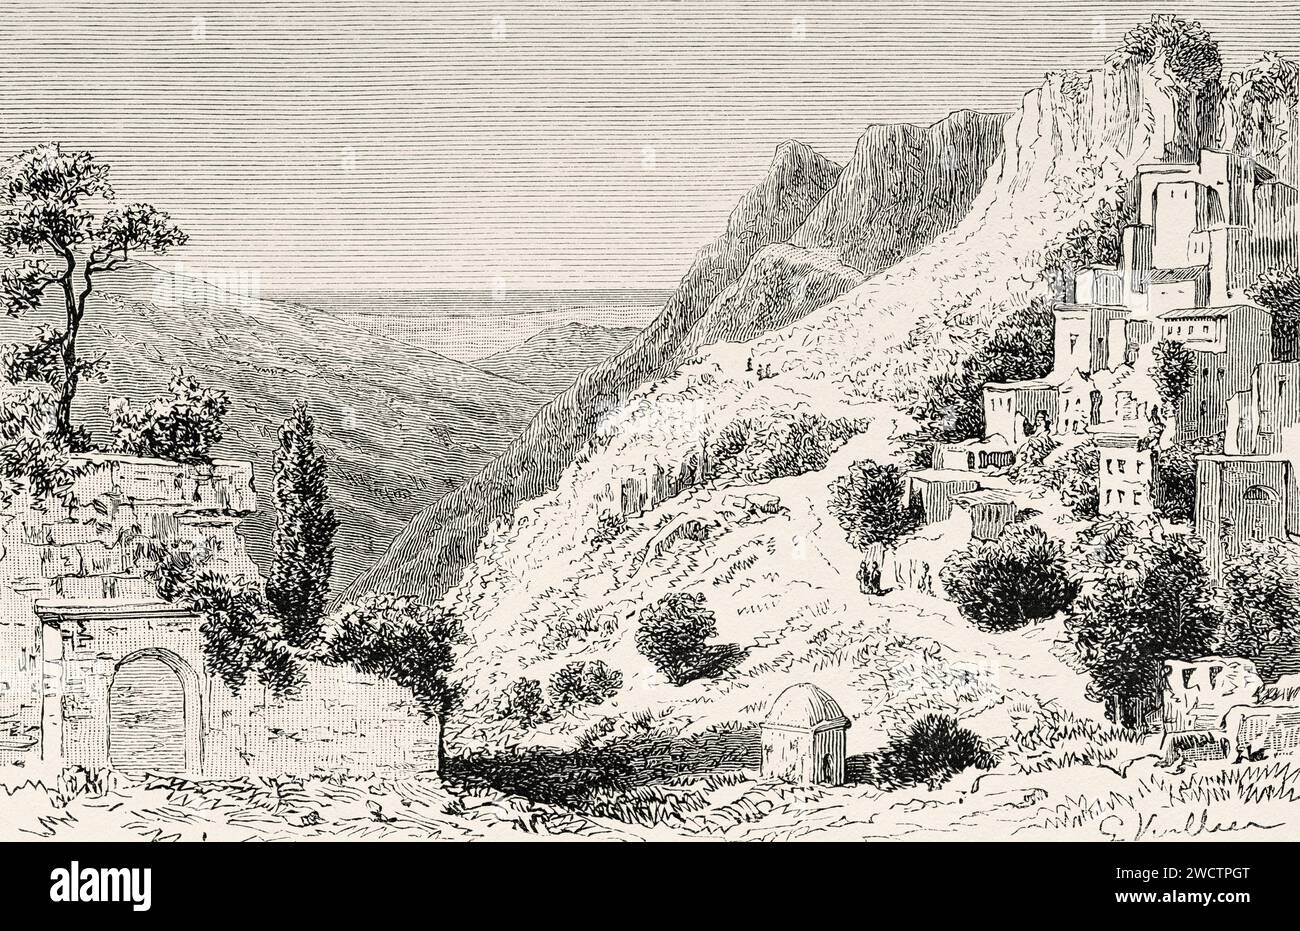 The Belen Pass, known in antiquity as the Syrian Gates is a pass through the Nur Mountains located in the Belen District of Hatay Province in south-central Turkey. Travel to Syria 1875-1878 by Charles Louis Lortet (1836 - 1909) Old 19th century engraving from Le Tour du Monde 1880 Stock Photo